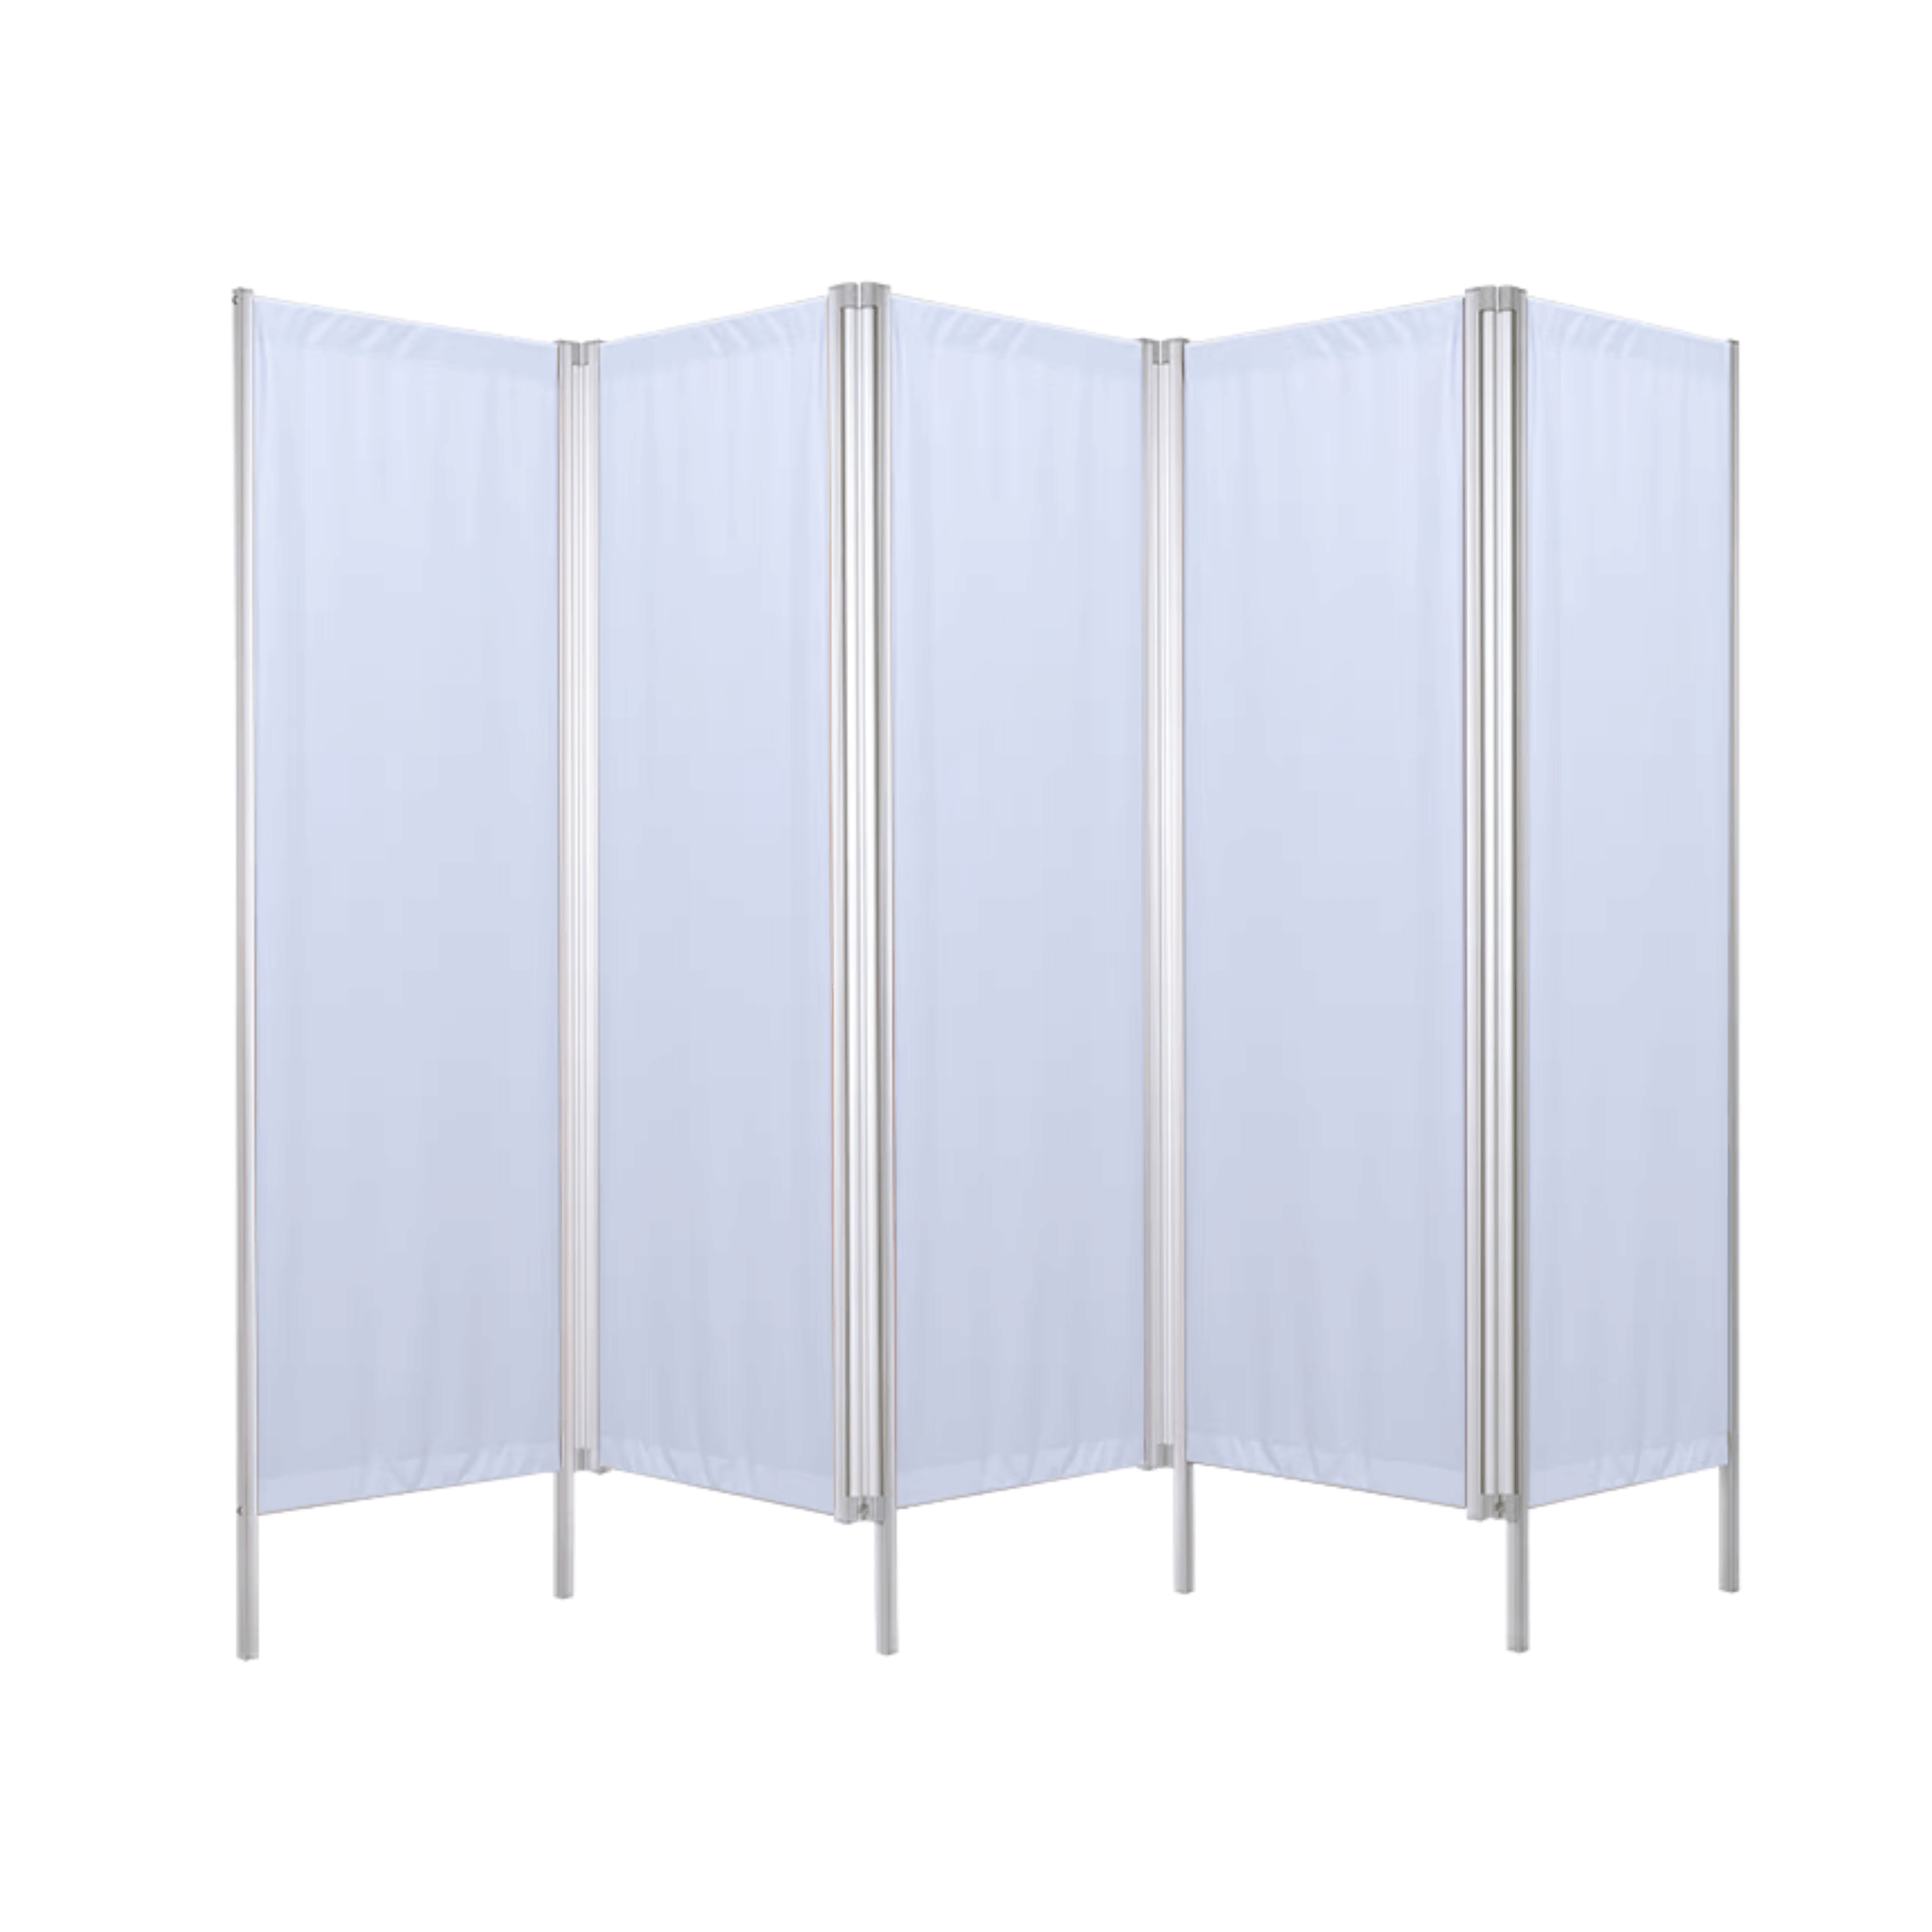 Privacy Screen- Lightweight, Folding, 4 Section, Blue, 165 X 204 cm